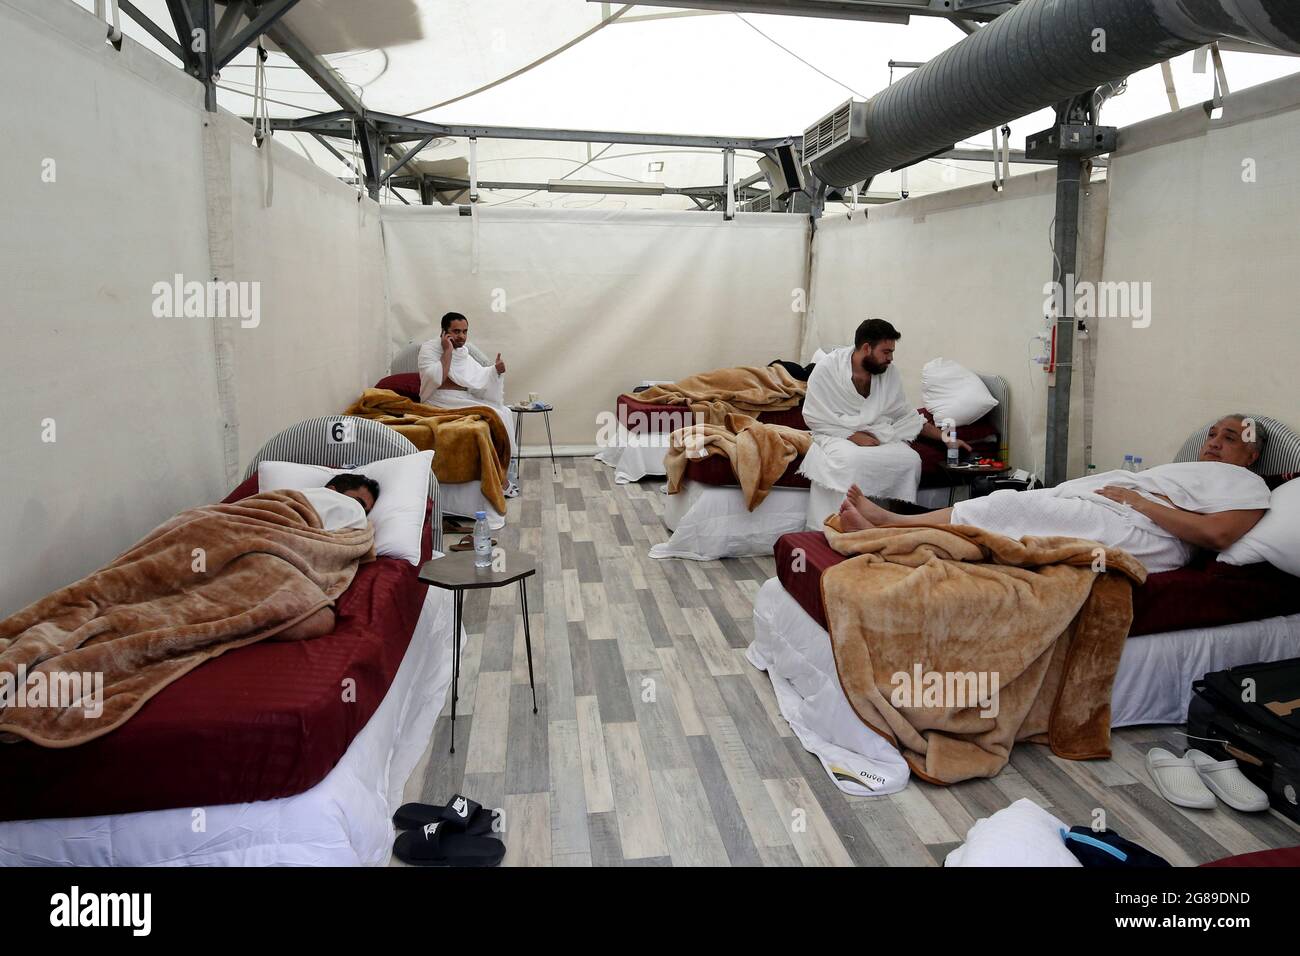 Pilgrims rest inside their tent in the Mina area during the annual Haj  pilgrimage, in the holy city of Mecca, Saudi Arabia, July 18, 2021.  REUTERS/ Ahmed Yosri Stock Photo - Alamy